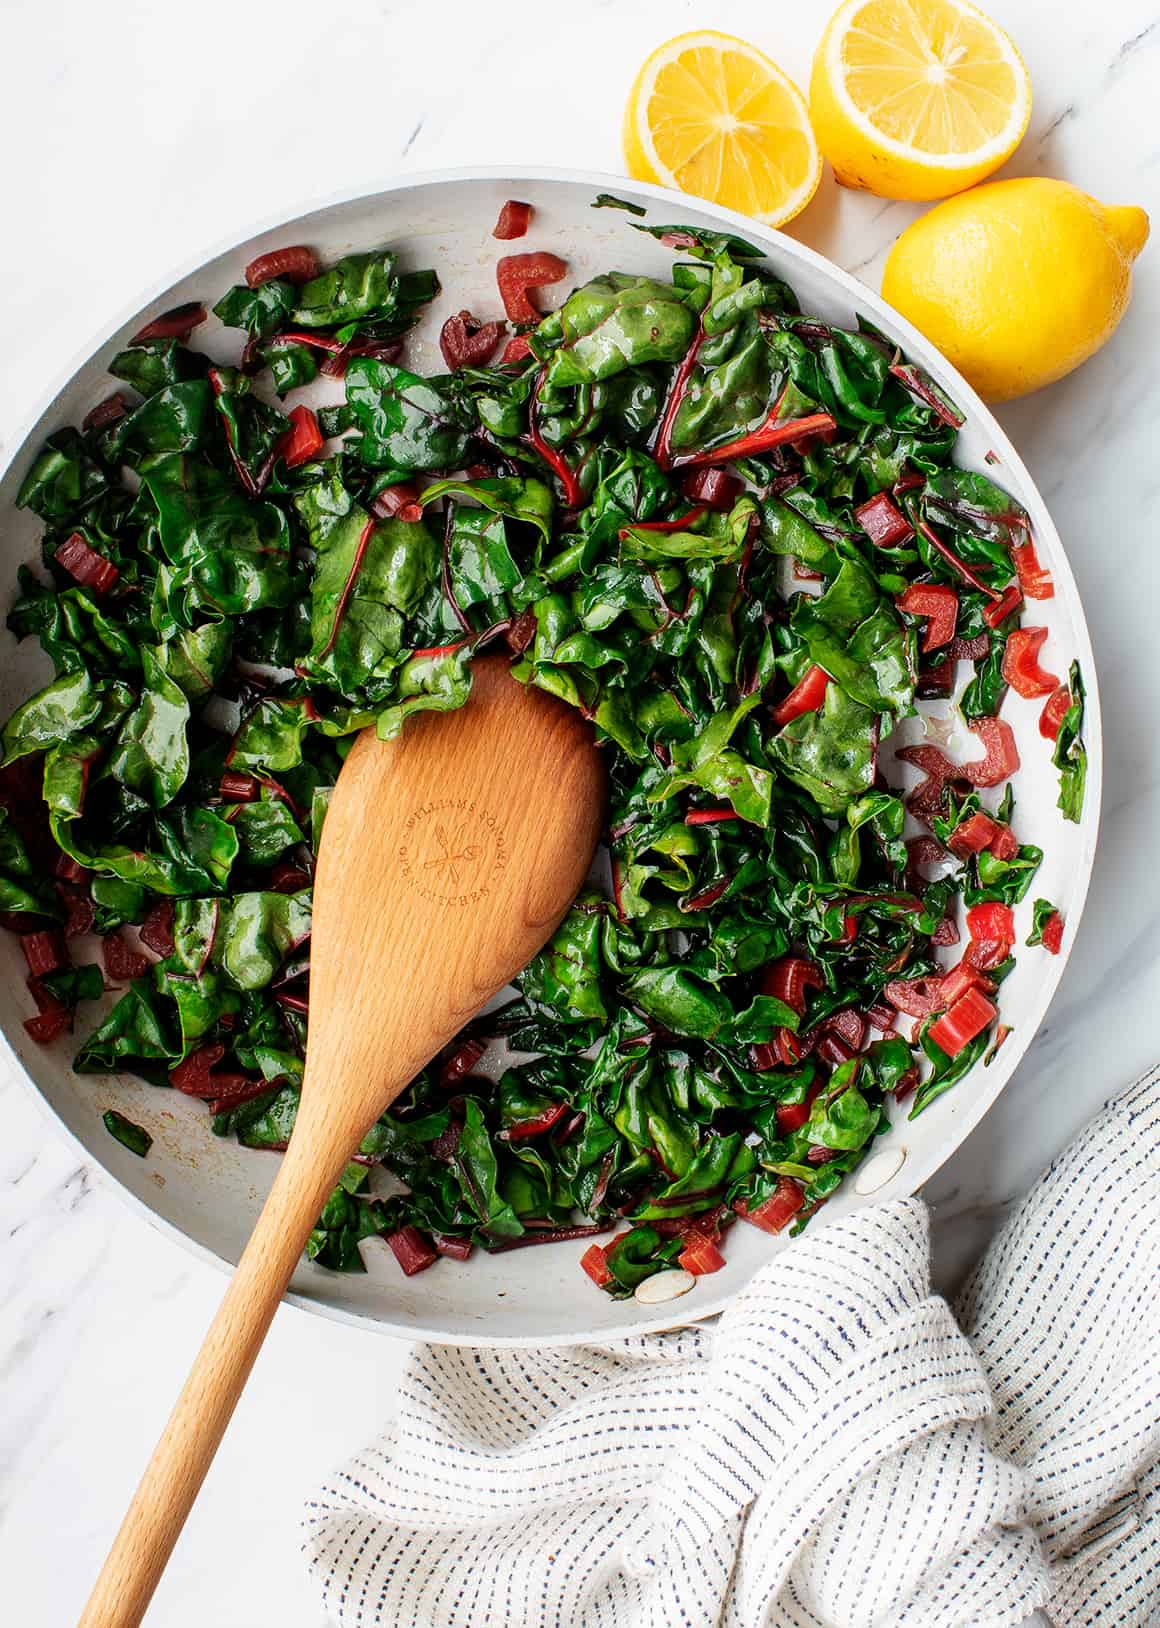 Sautéed Swiss chard in skillet with wooden spoon